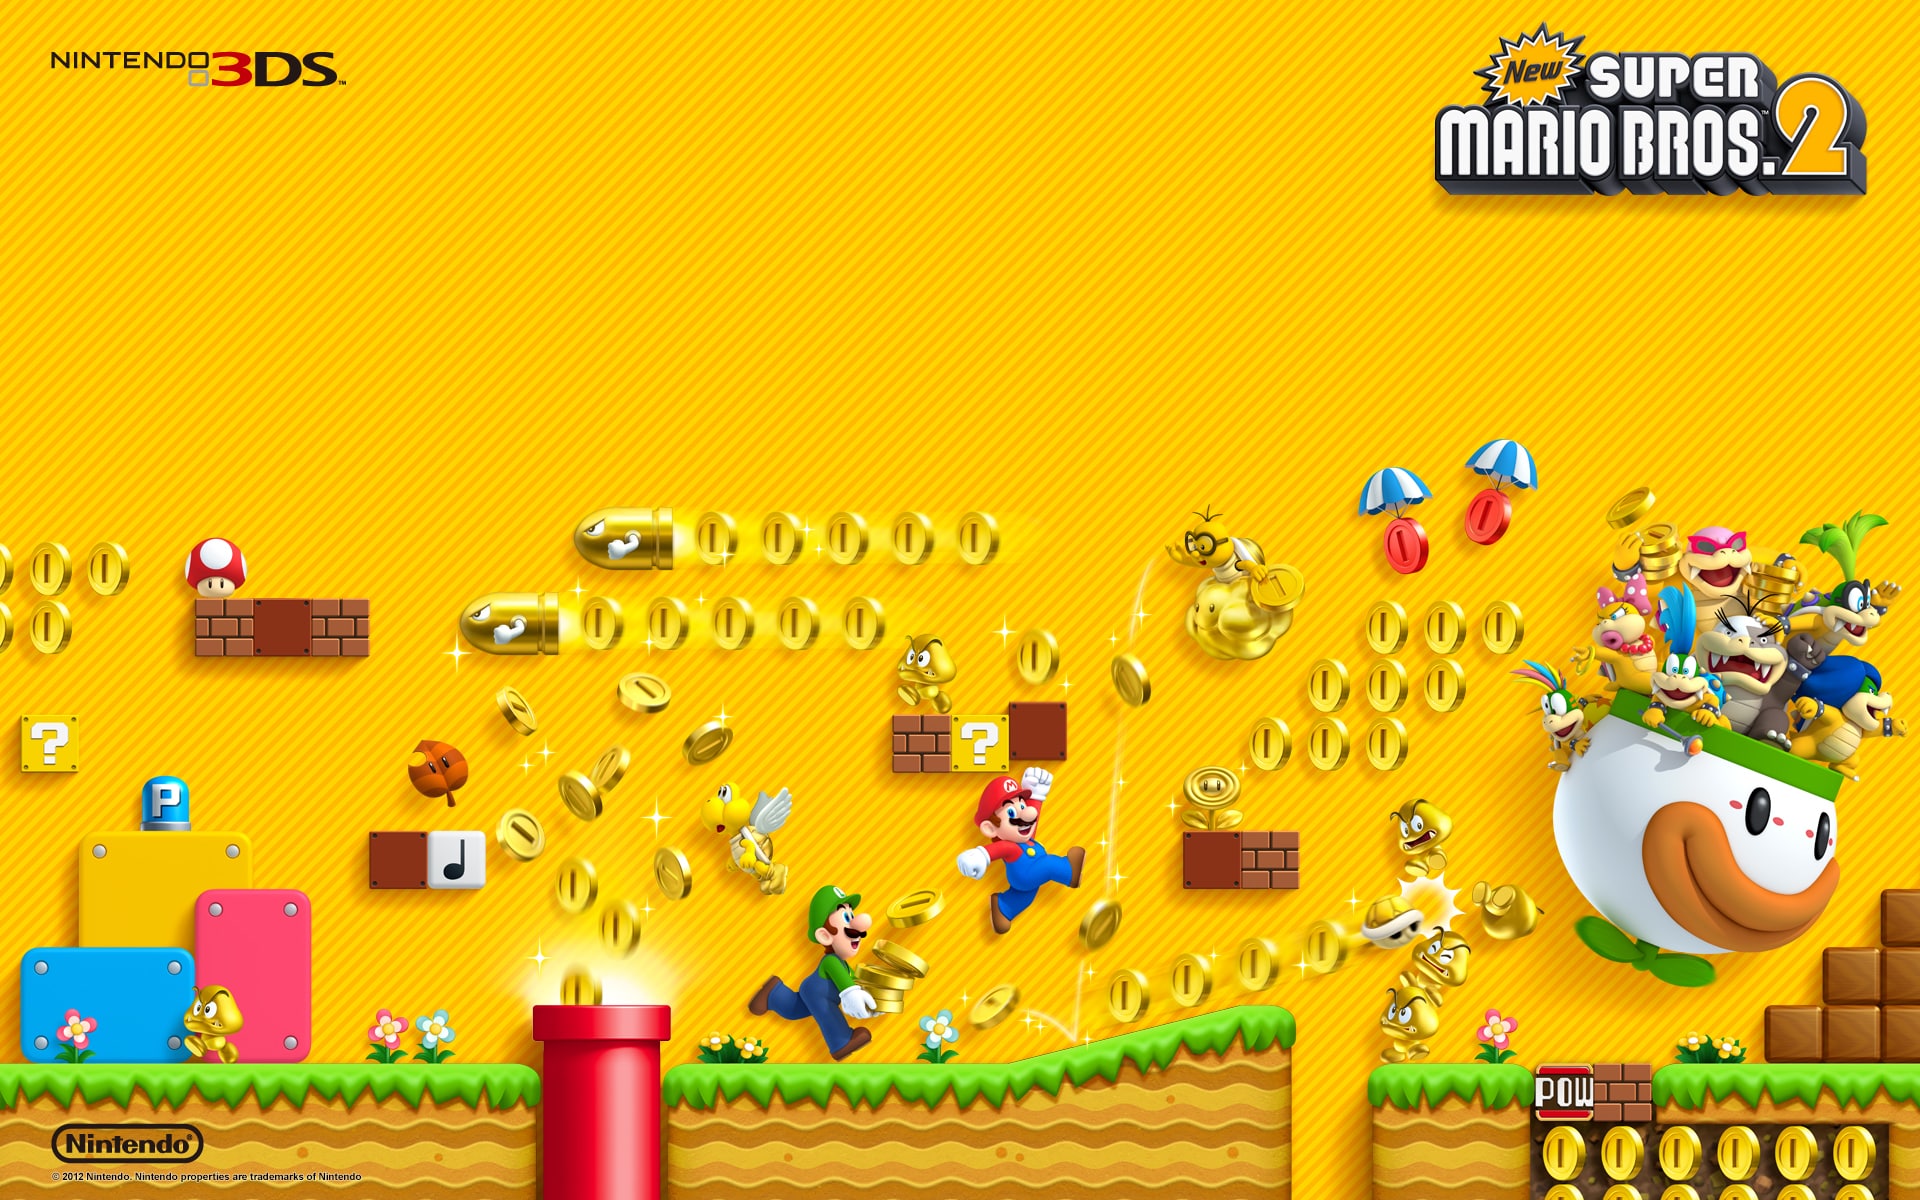 how do you unlock the special worlds on new super mario bros 2